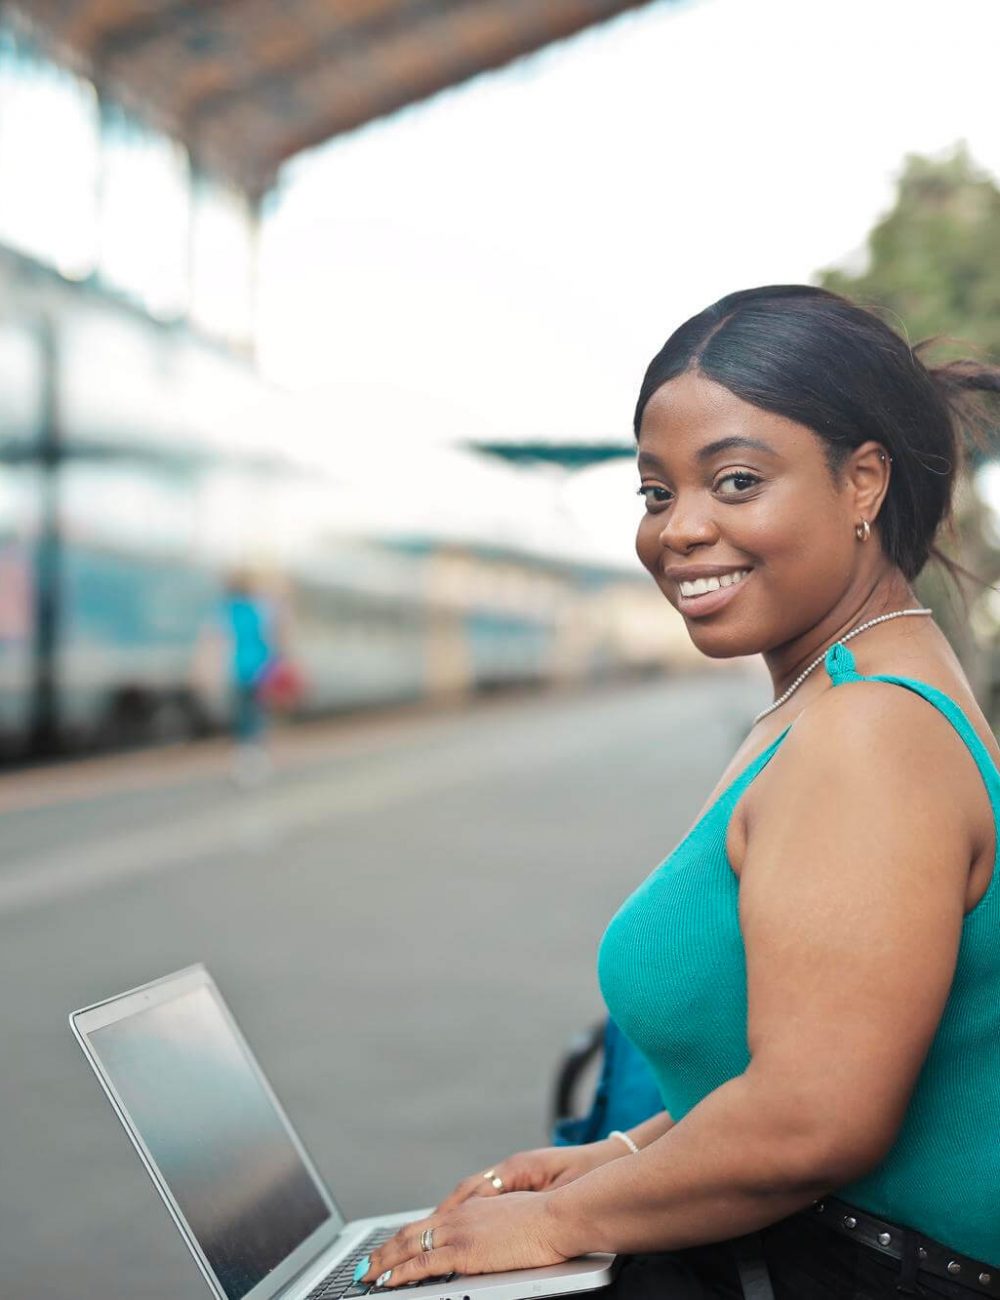 portrait-of-young-woman-with-laptop-in-train-station